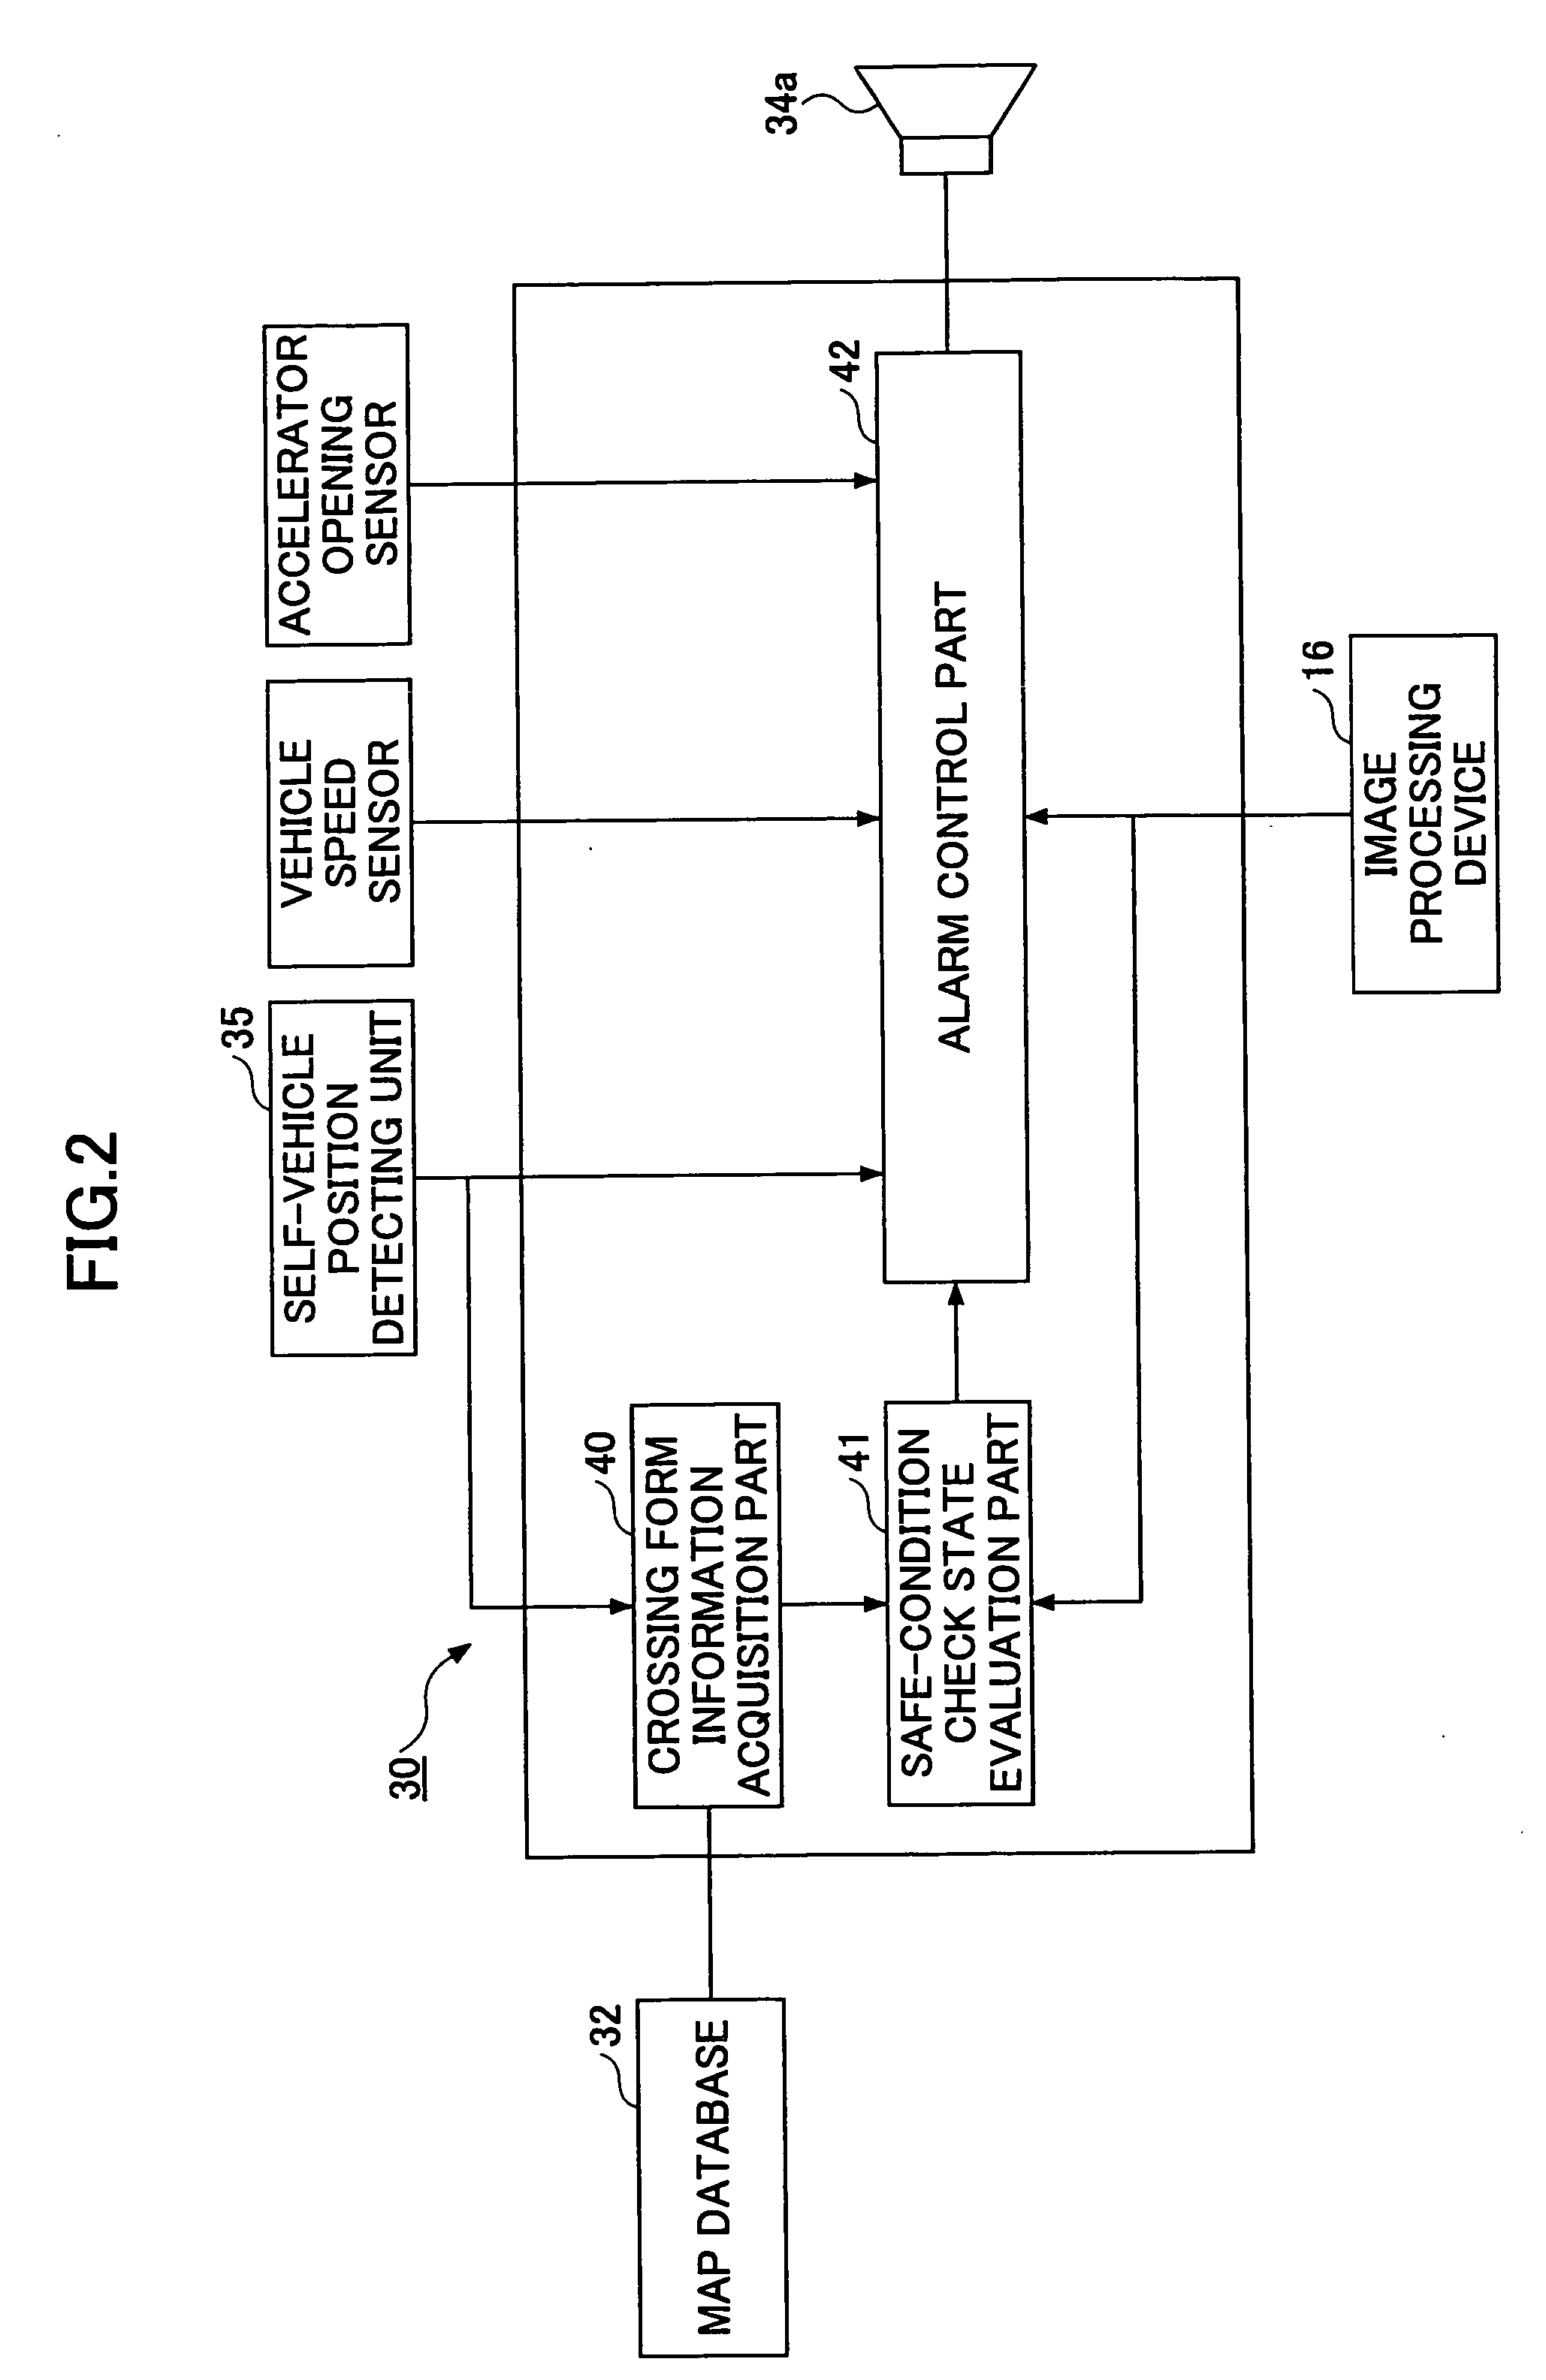 Vehicle information notification device